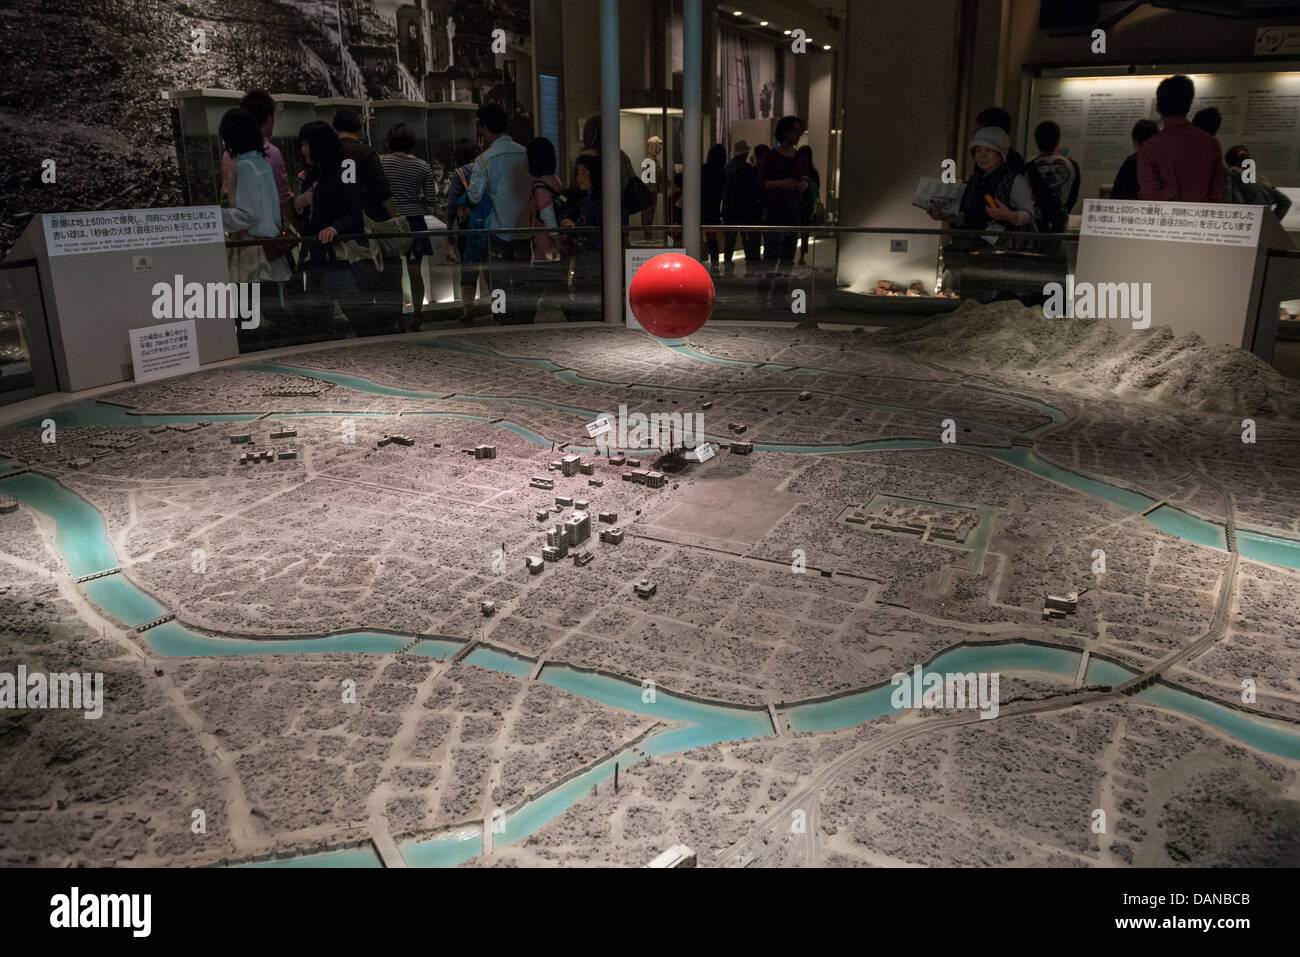 Map of Hiroshima after the Nuclear Explosion in Hiroshima Peace Memorial Museum. The Red Ball Depicts the Hypocenter, Japan Stock Photo